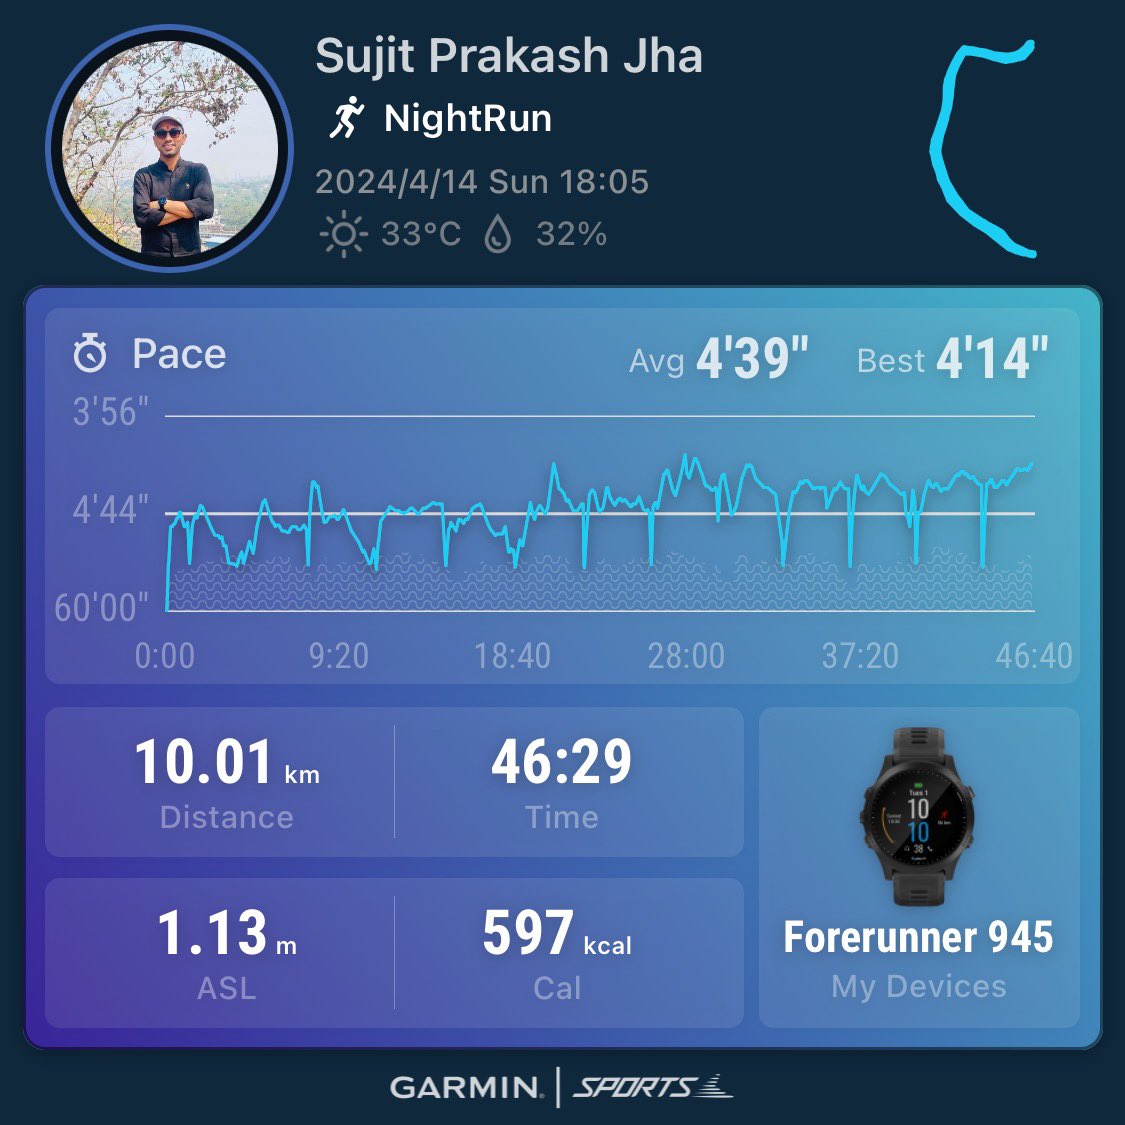 Missed in the morning did in the evening. 🙏🙂
@FitIndiaOff 
@kheloindia 
@KhelMaithili